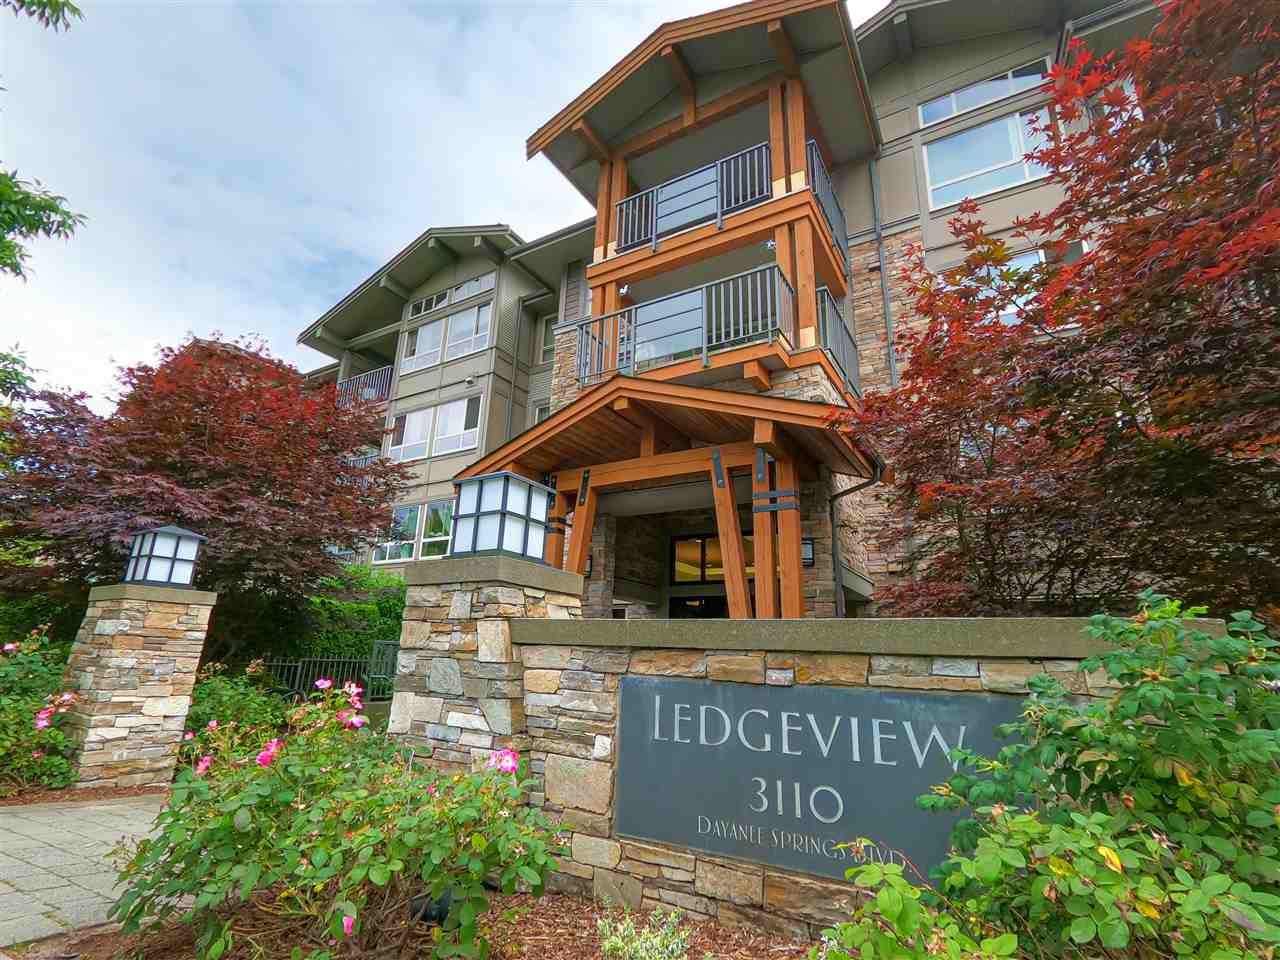 Main Photo: 506 3110 DAYANEE SPRINGS Boulevard in Coquitlam: Westwood Plateau Condo for sale : MLS®# R2478469